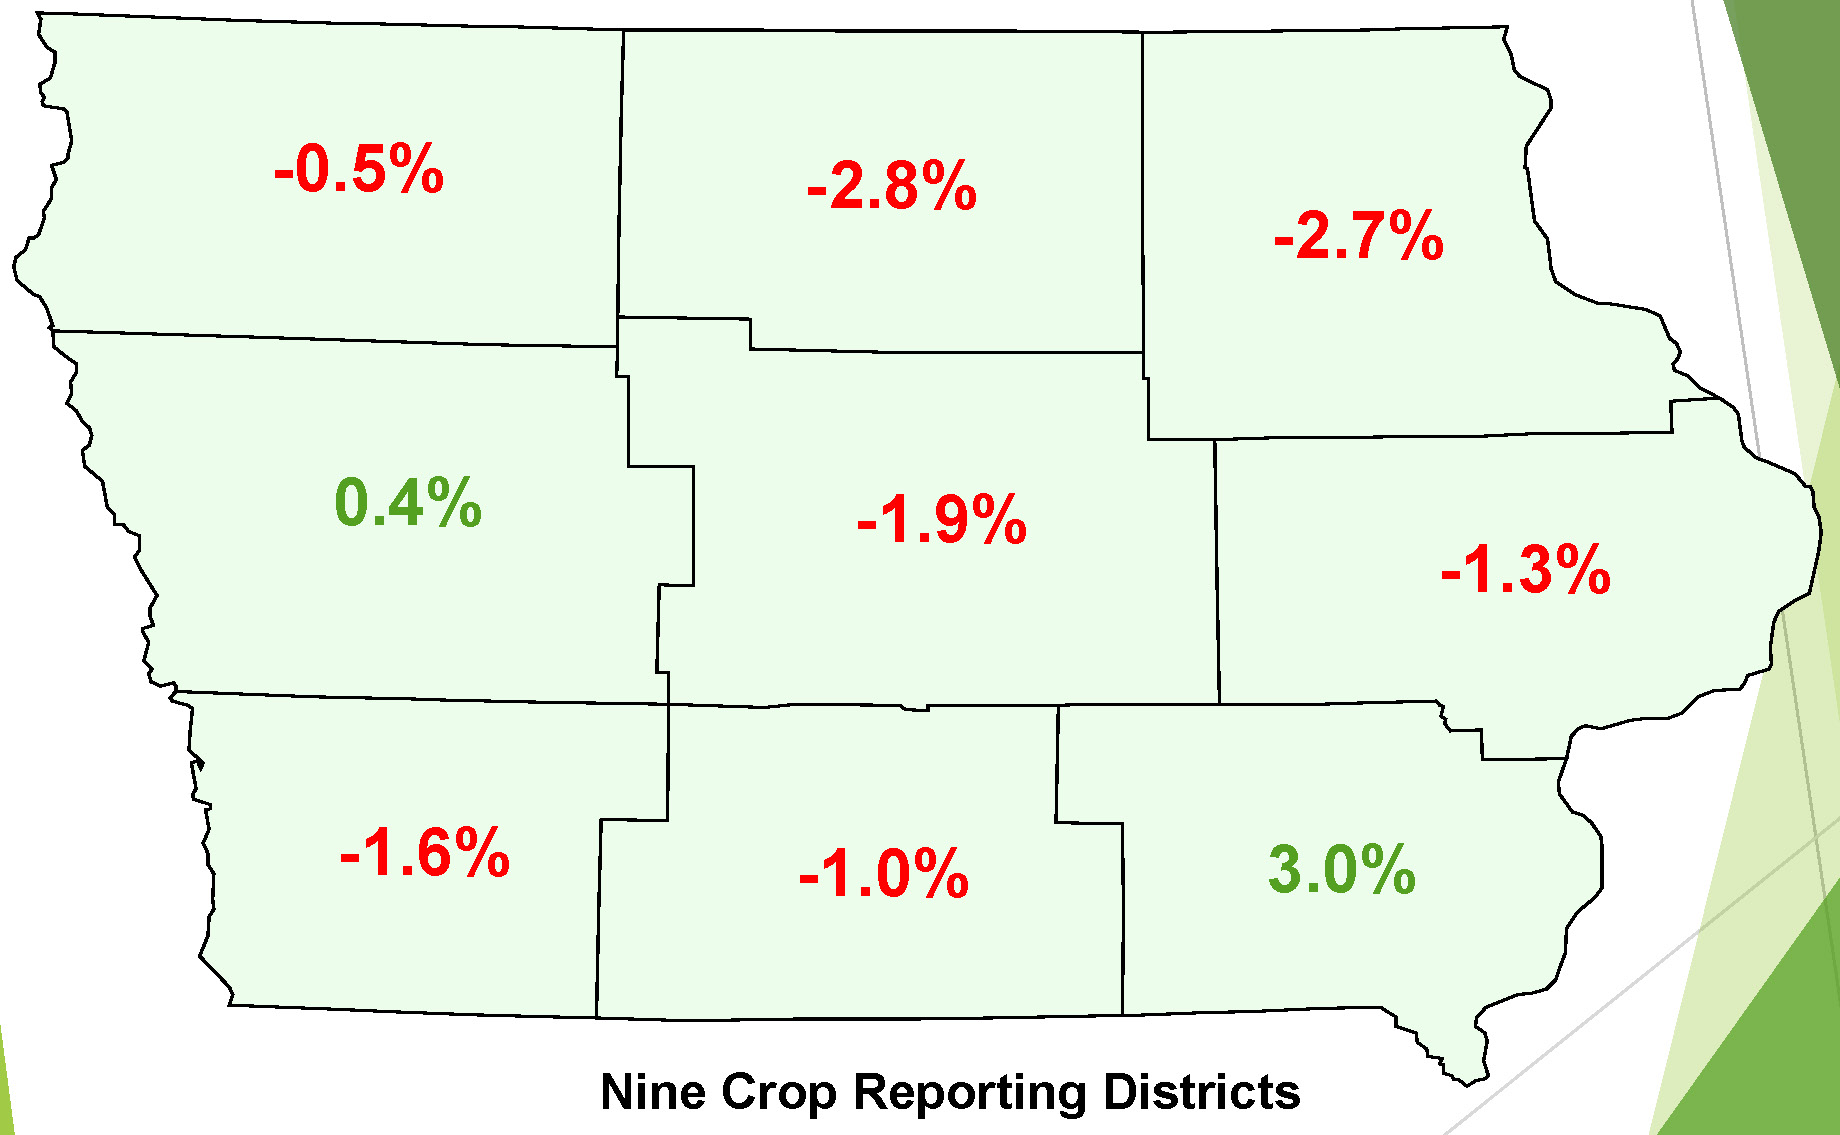 Area cropland drops in value, according to state survey